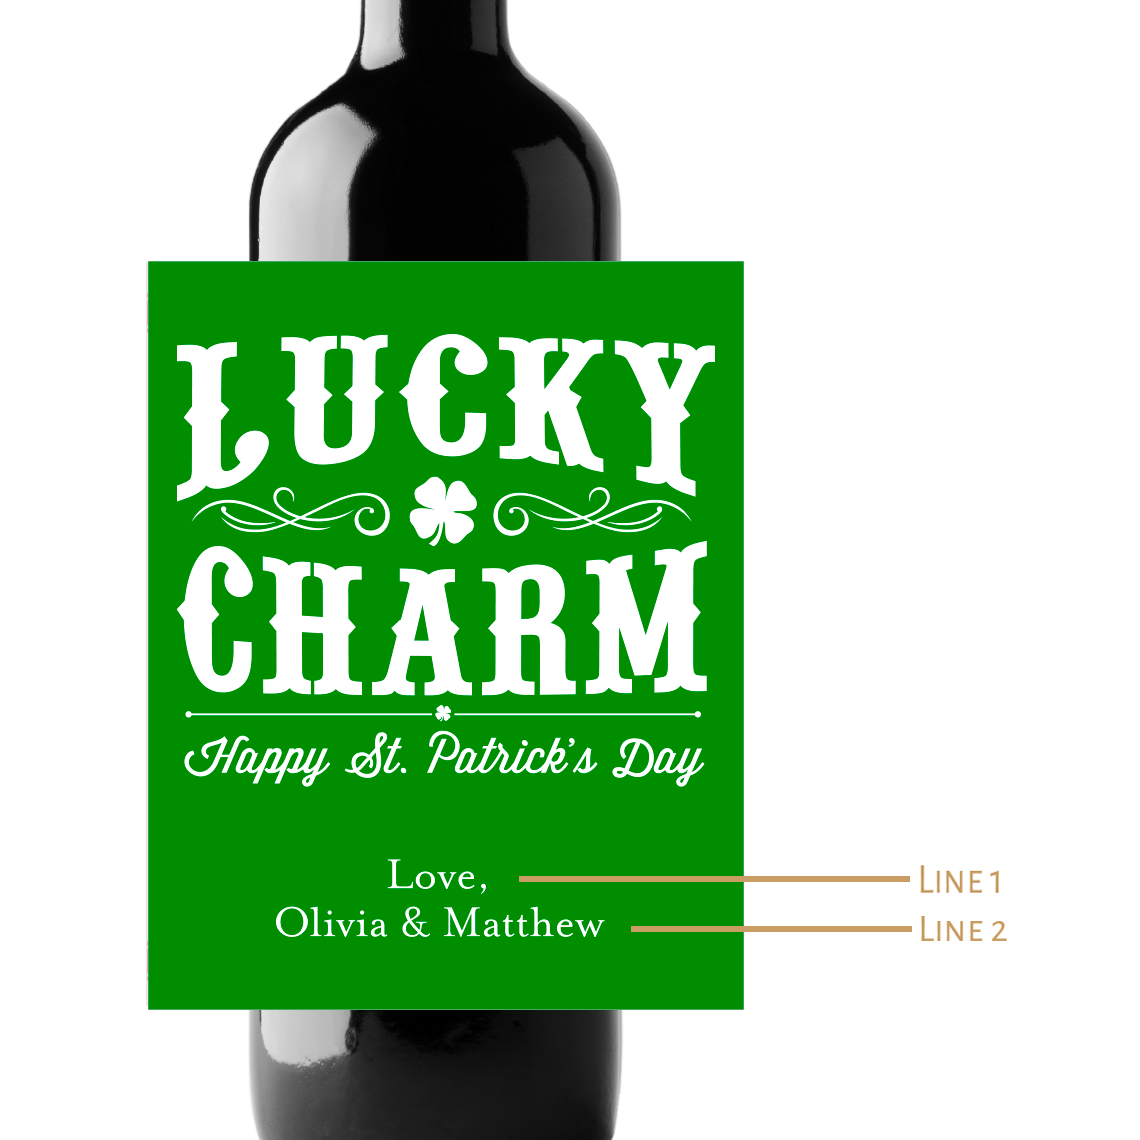 Lucky Charm St. Patrick's Day Custom Personalized Wine Champagne Labels (set of 3)